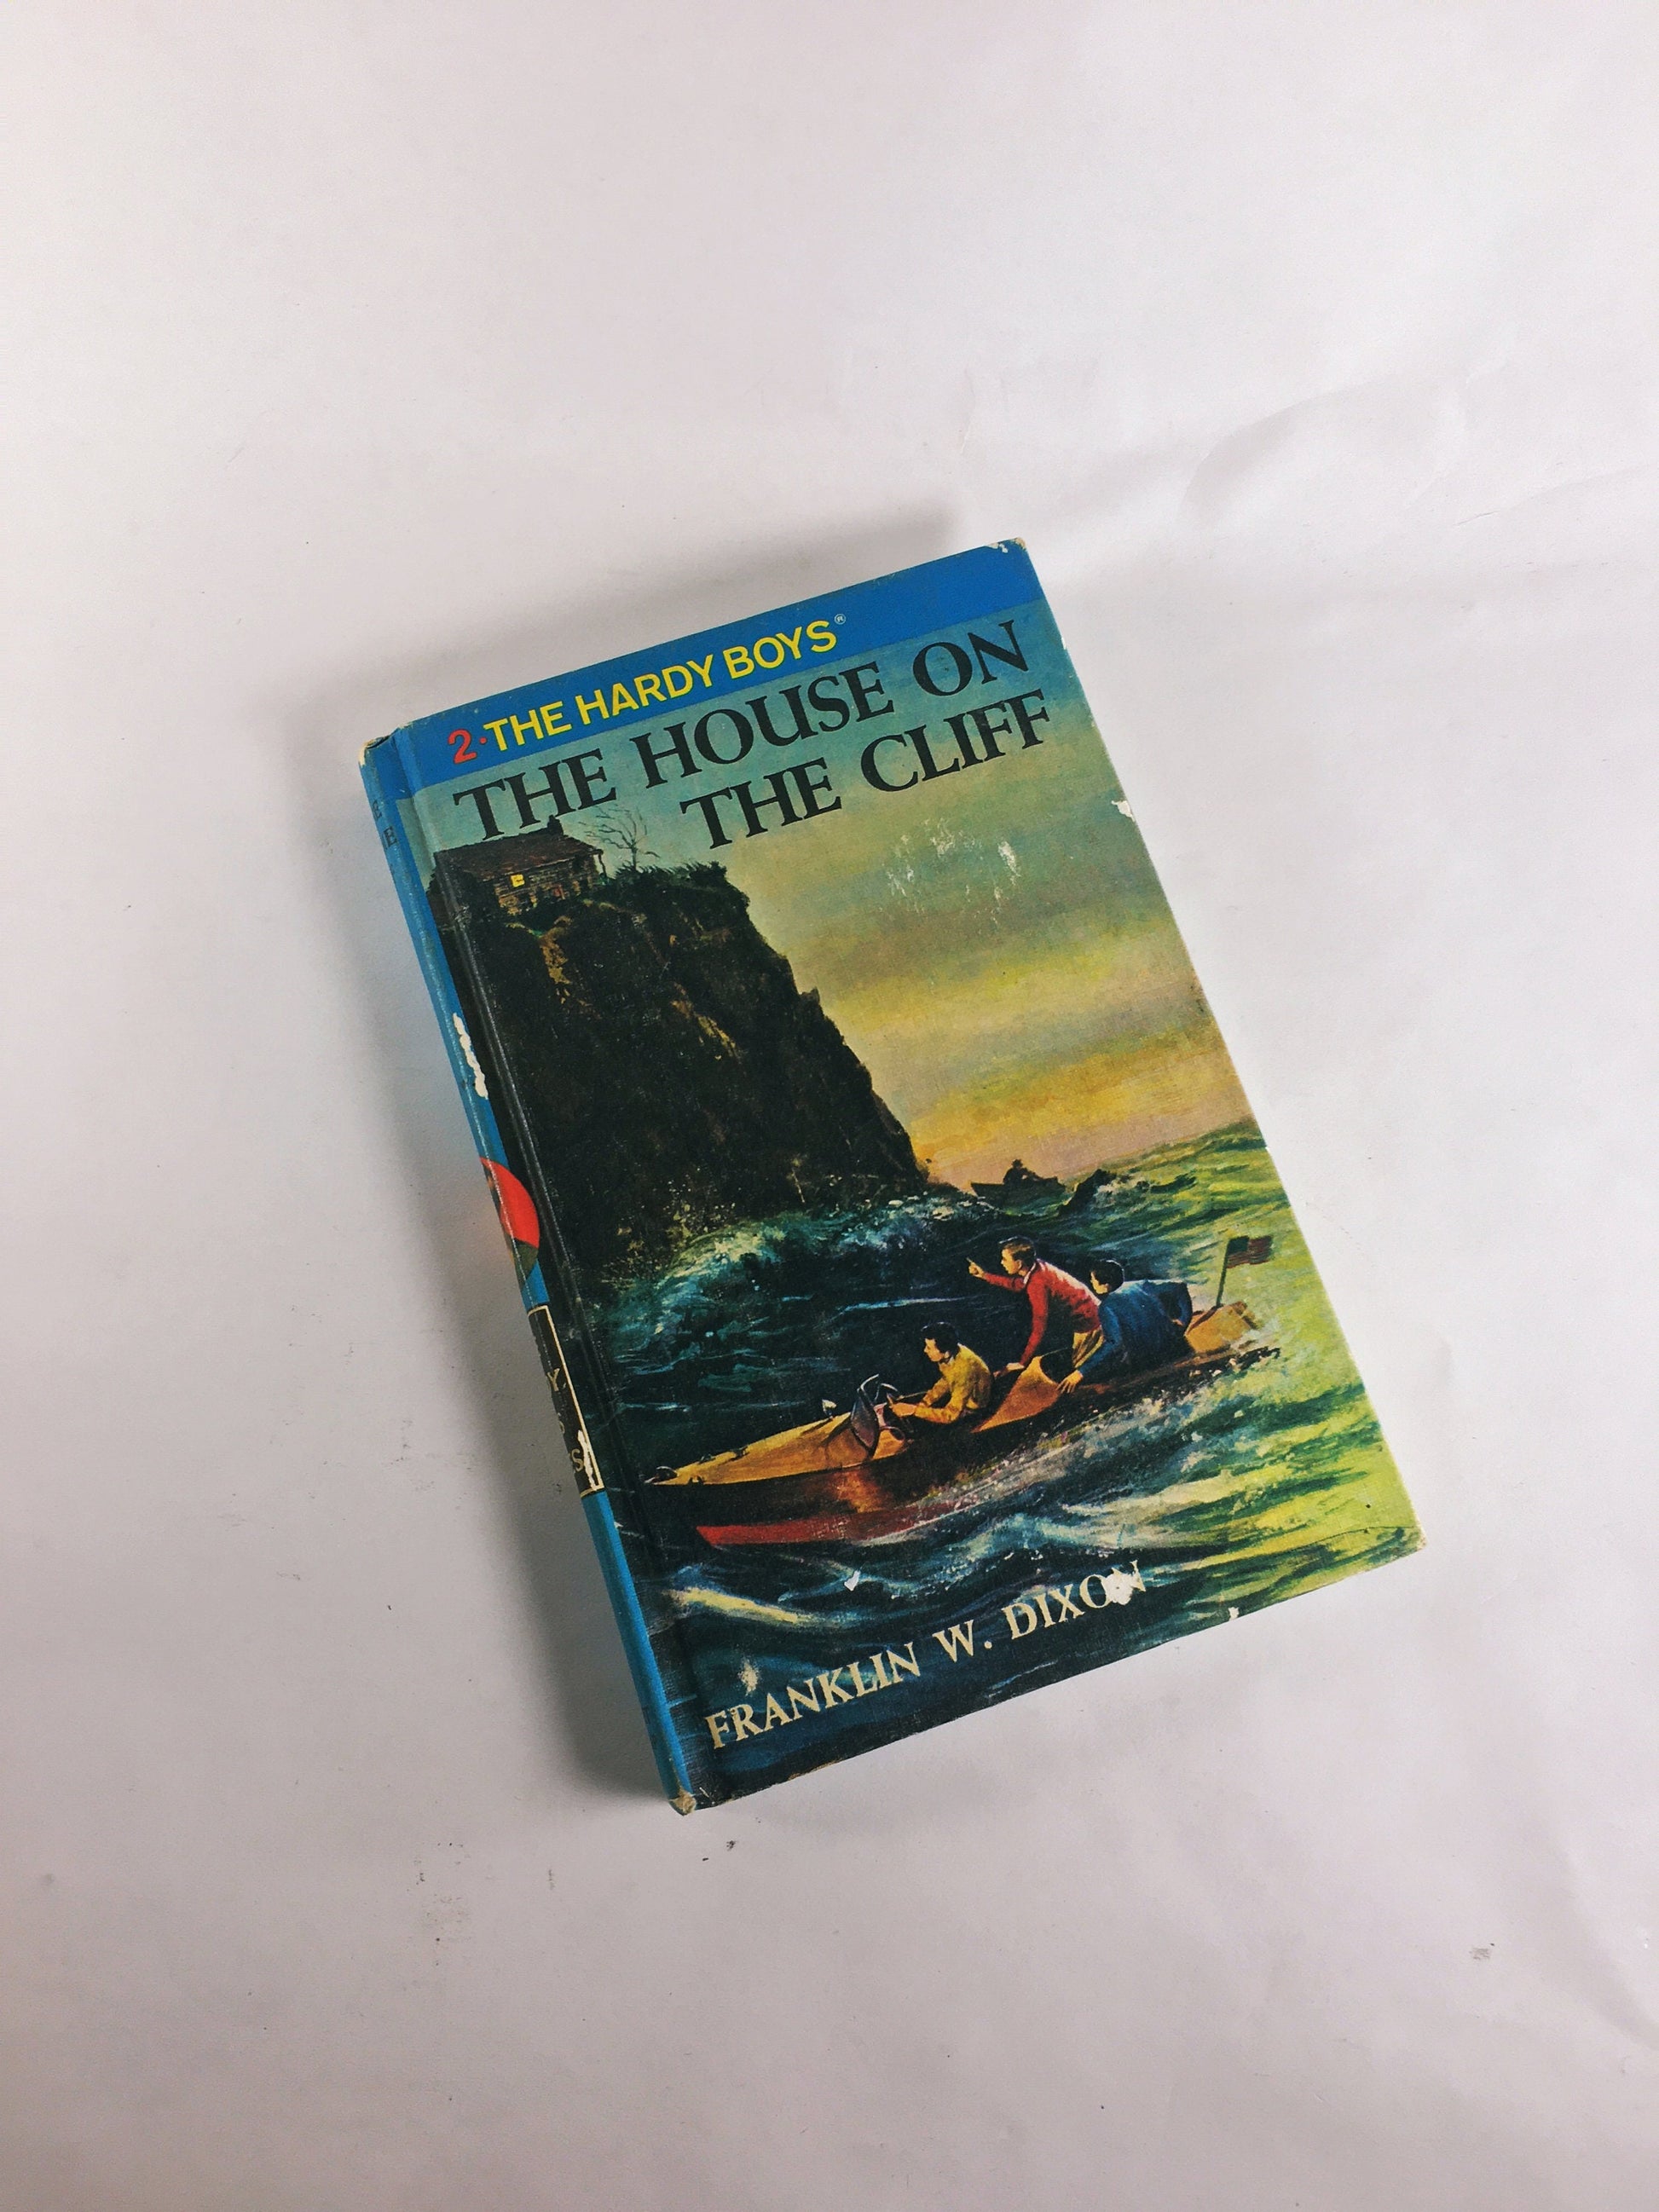 Hardy Boys vintage book lot circa 1950s 1960s 1970s by Franklin Dixon Picture cover books. Blue tween teen mystery series home reading